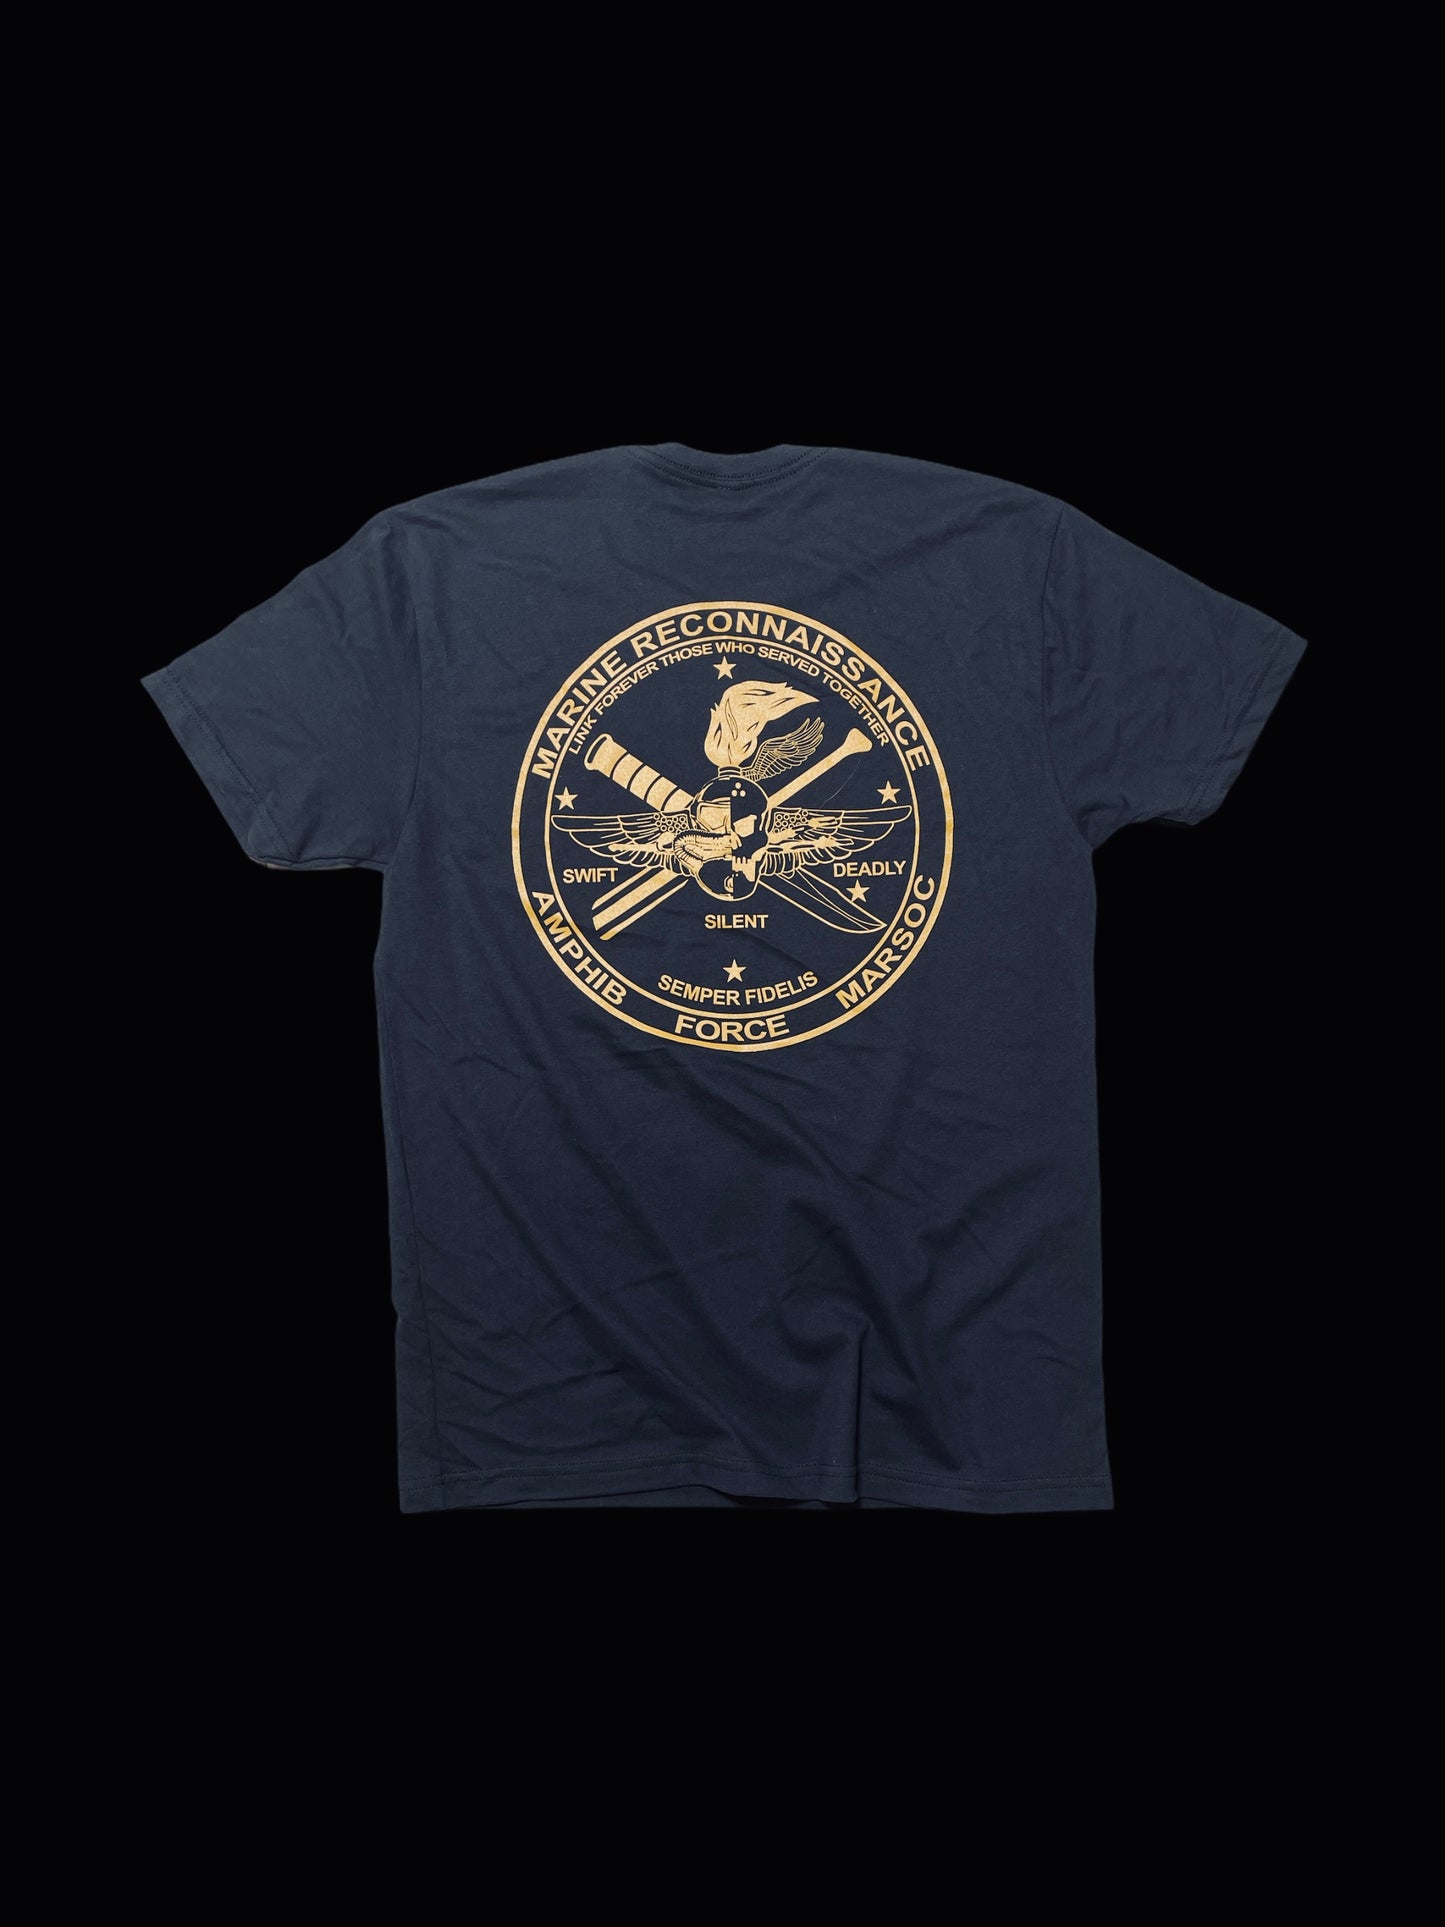 Force Recon Association (FRA) Fundraiser Tee